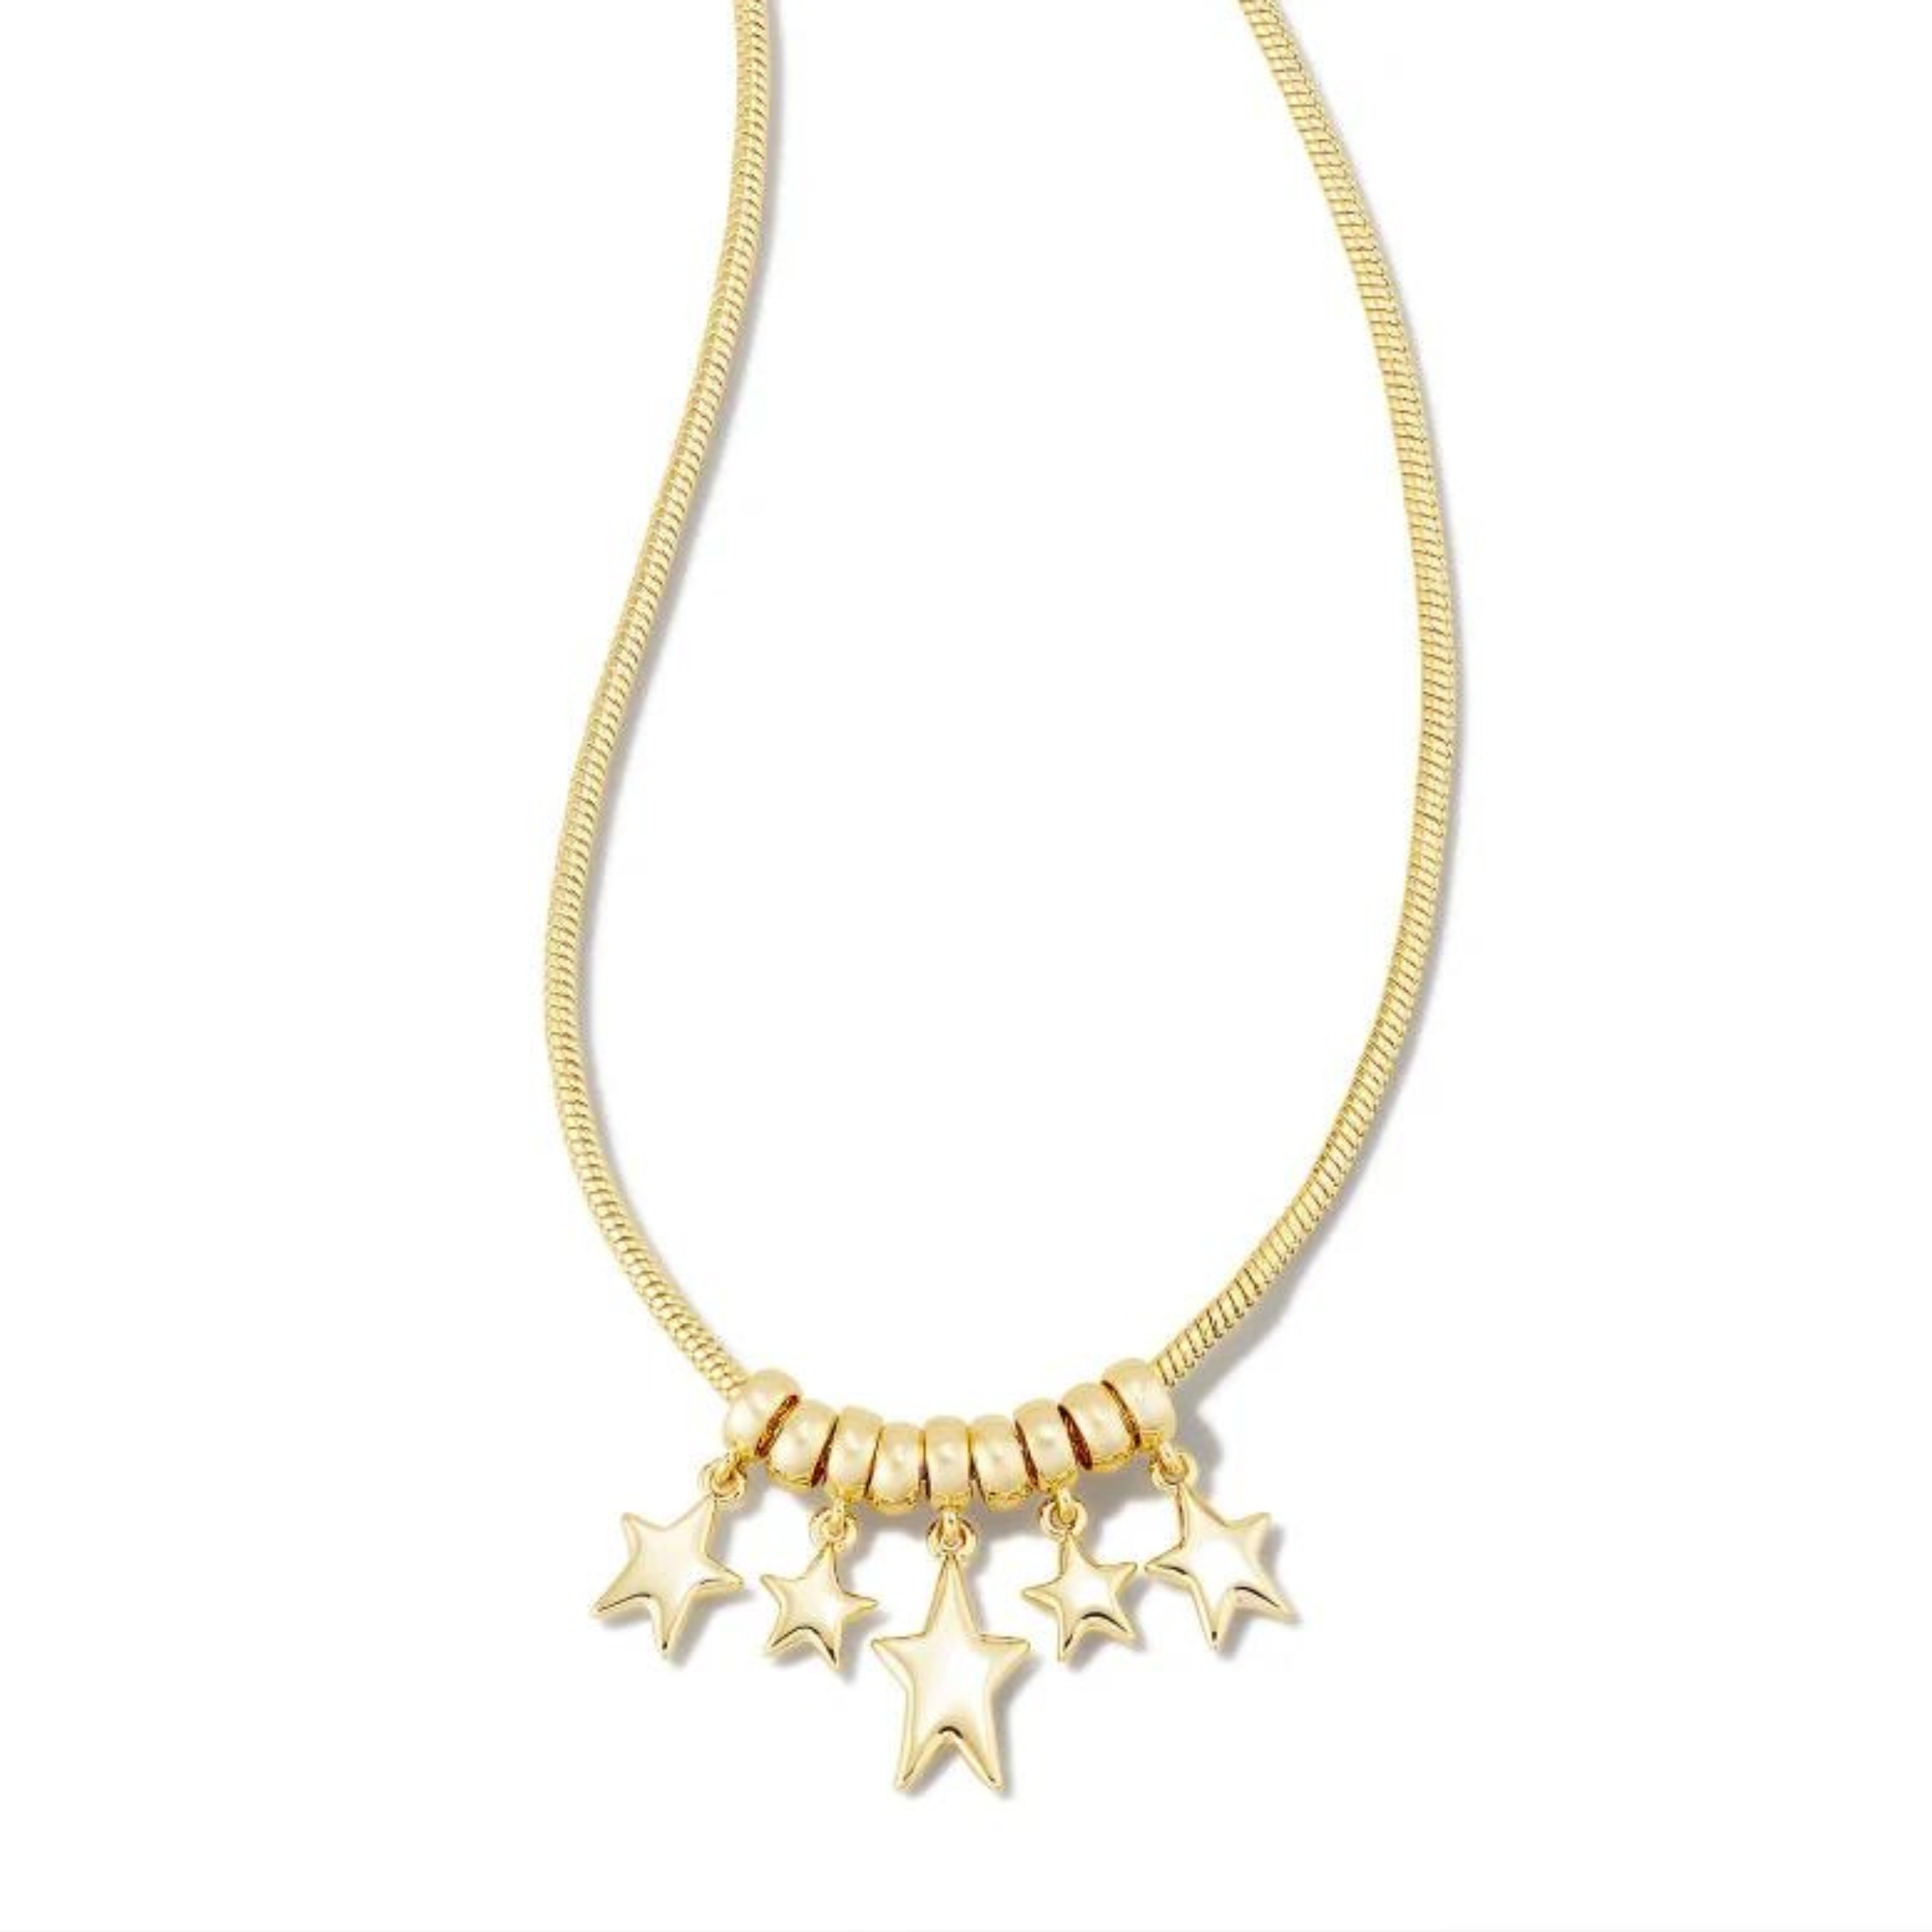 Kendra Scott | Ada Star Necklace in Gold - Giddy Up Glamour Boutique